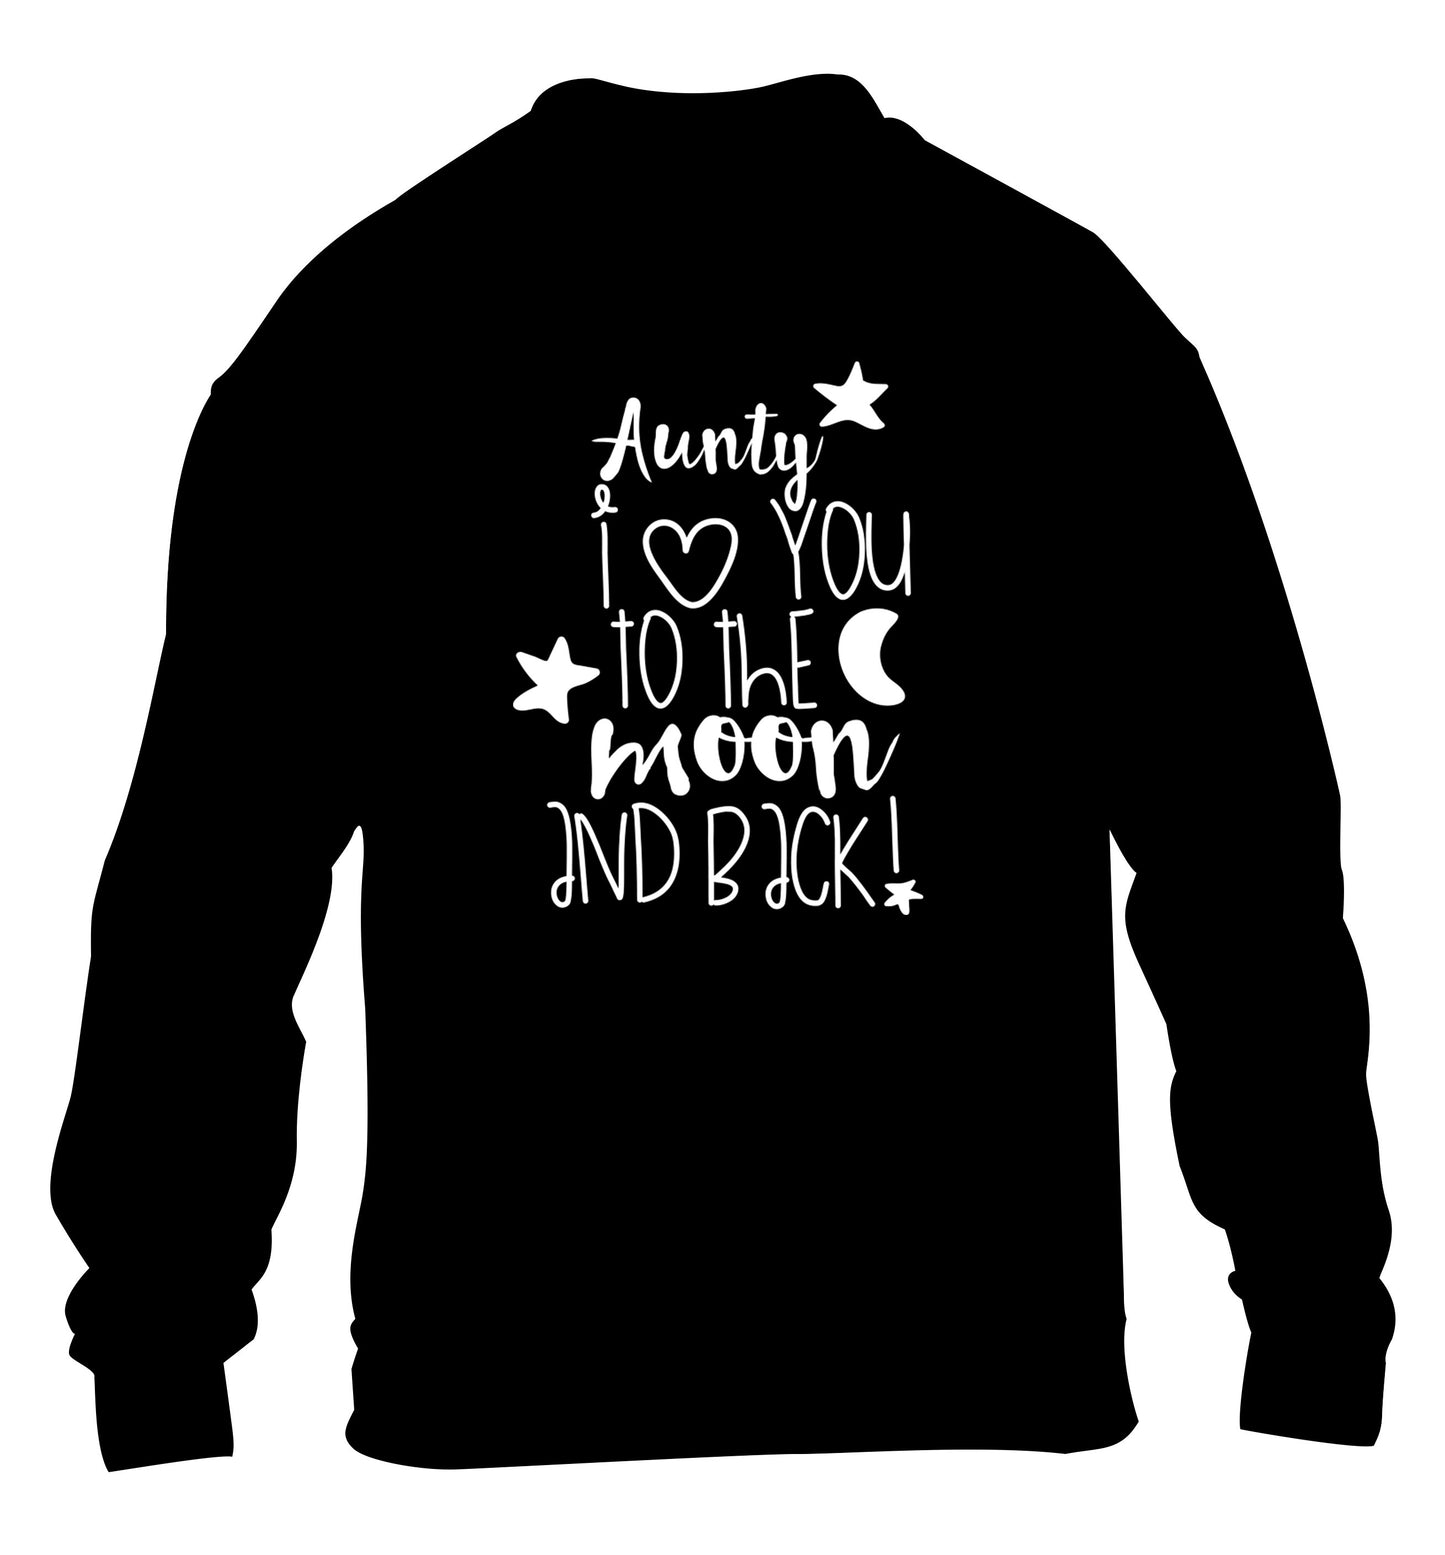 Aunty I love you to the moon and back children's black  sweater 12-14 Years